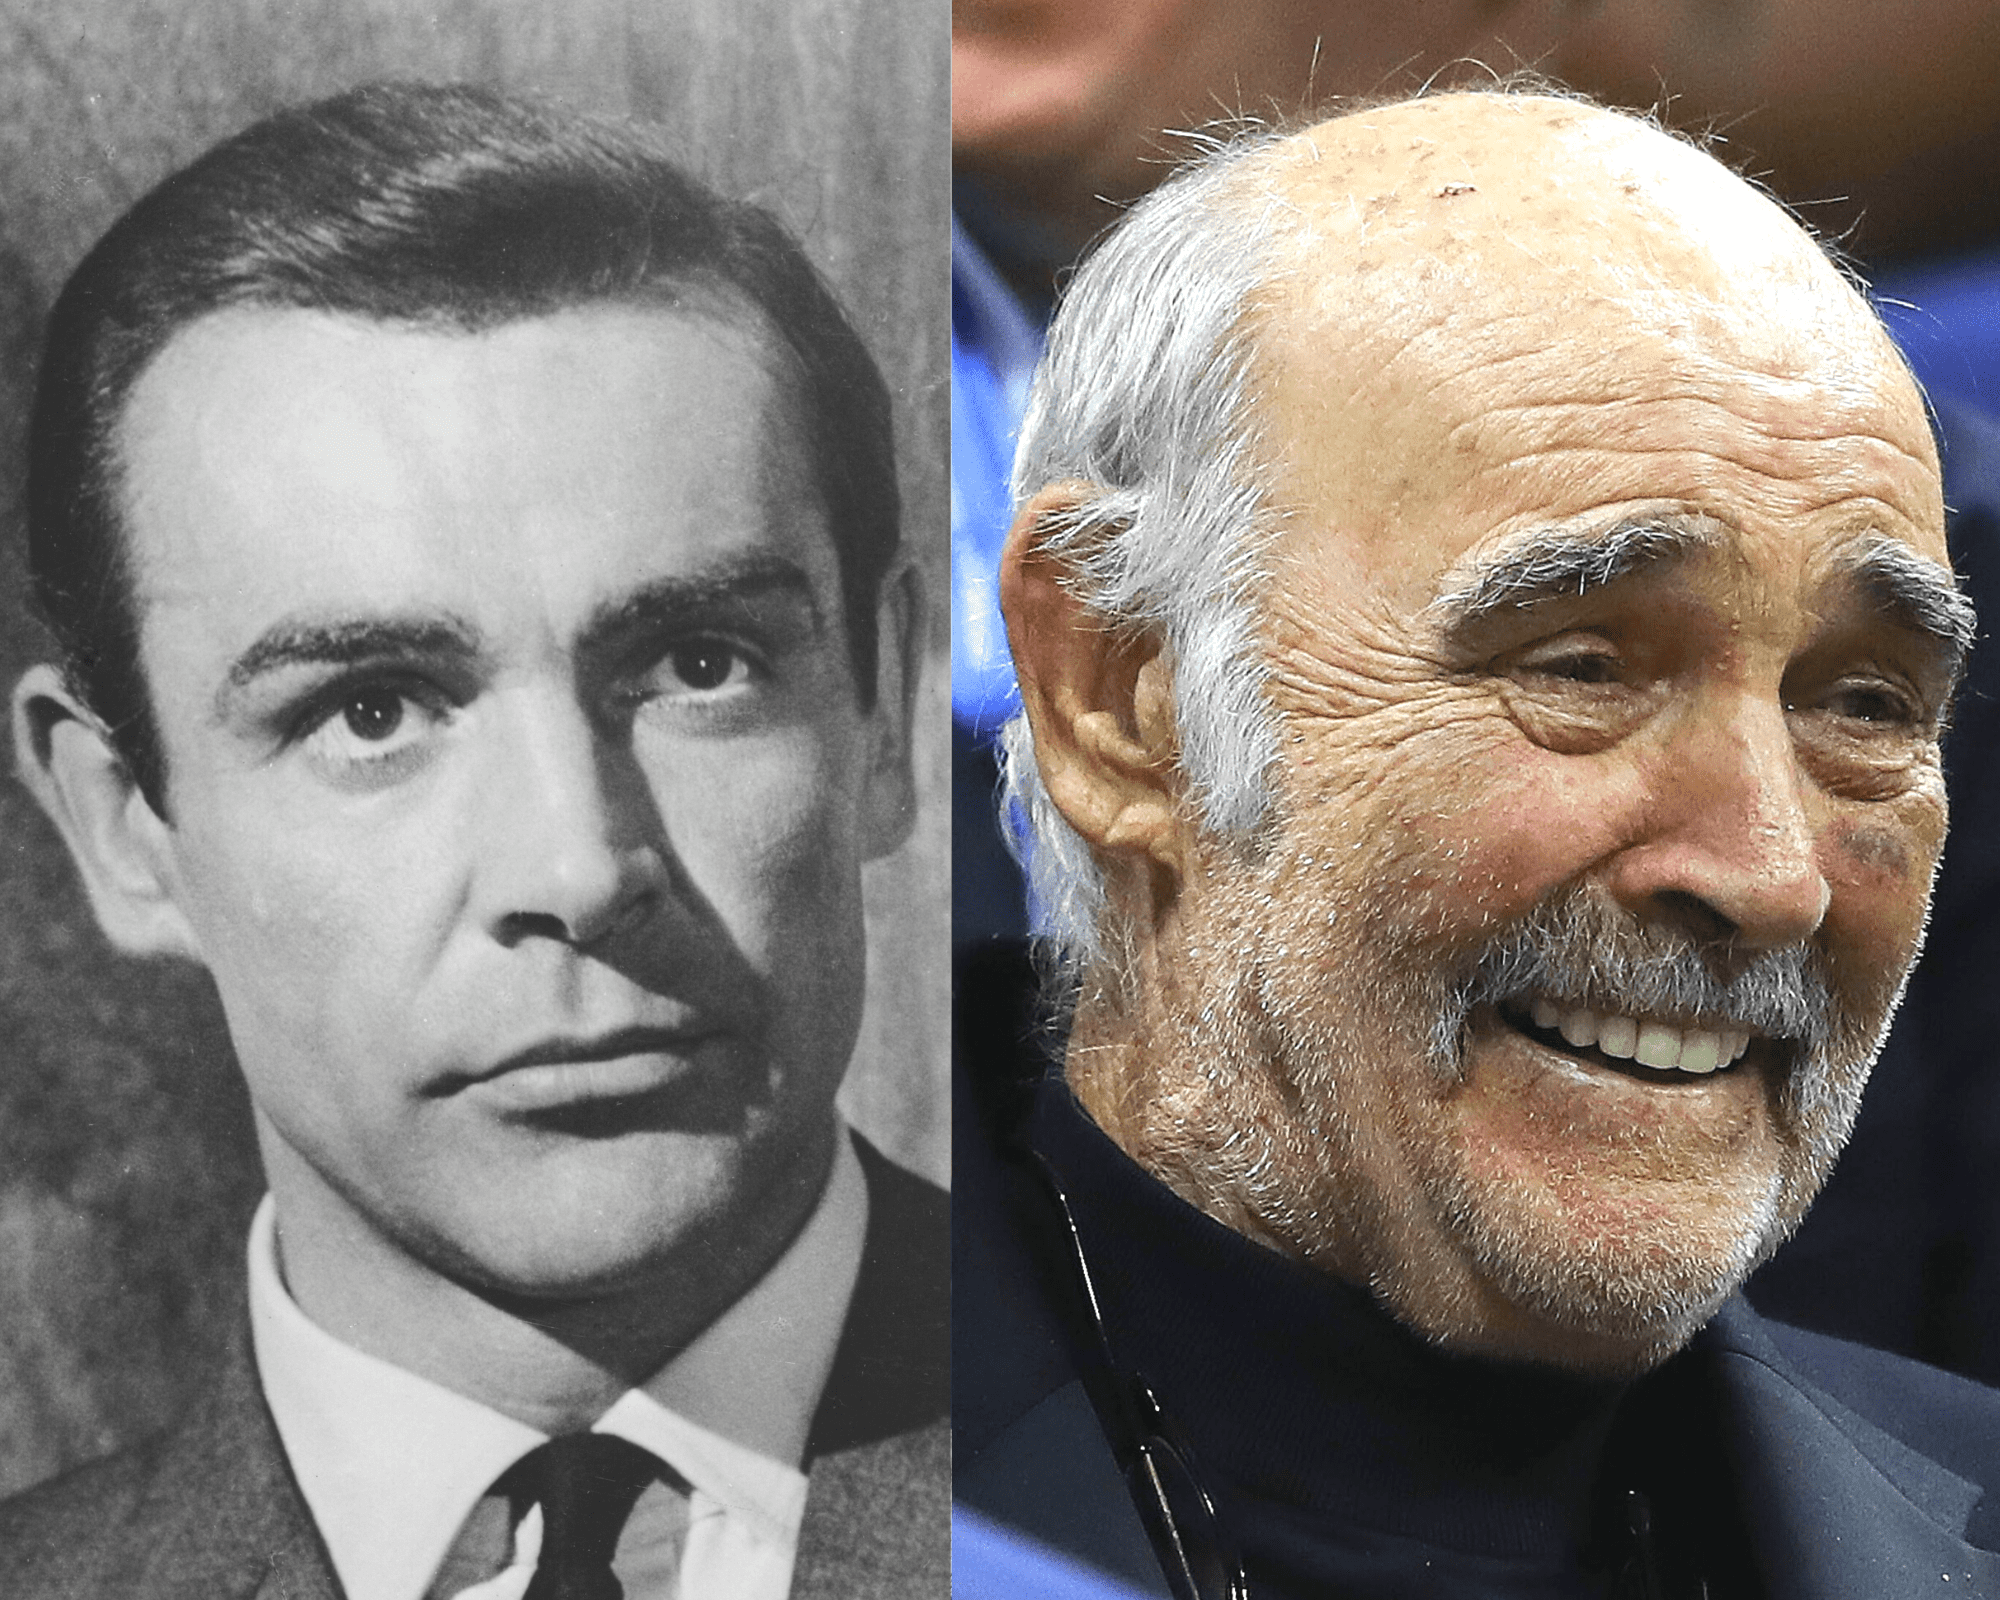 Scottish actor Sean Connery in the 1960s | Sean Connery at the Us Open on August 29, 2017 in New York City | Getty Images 